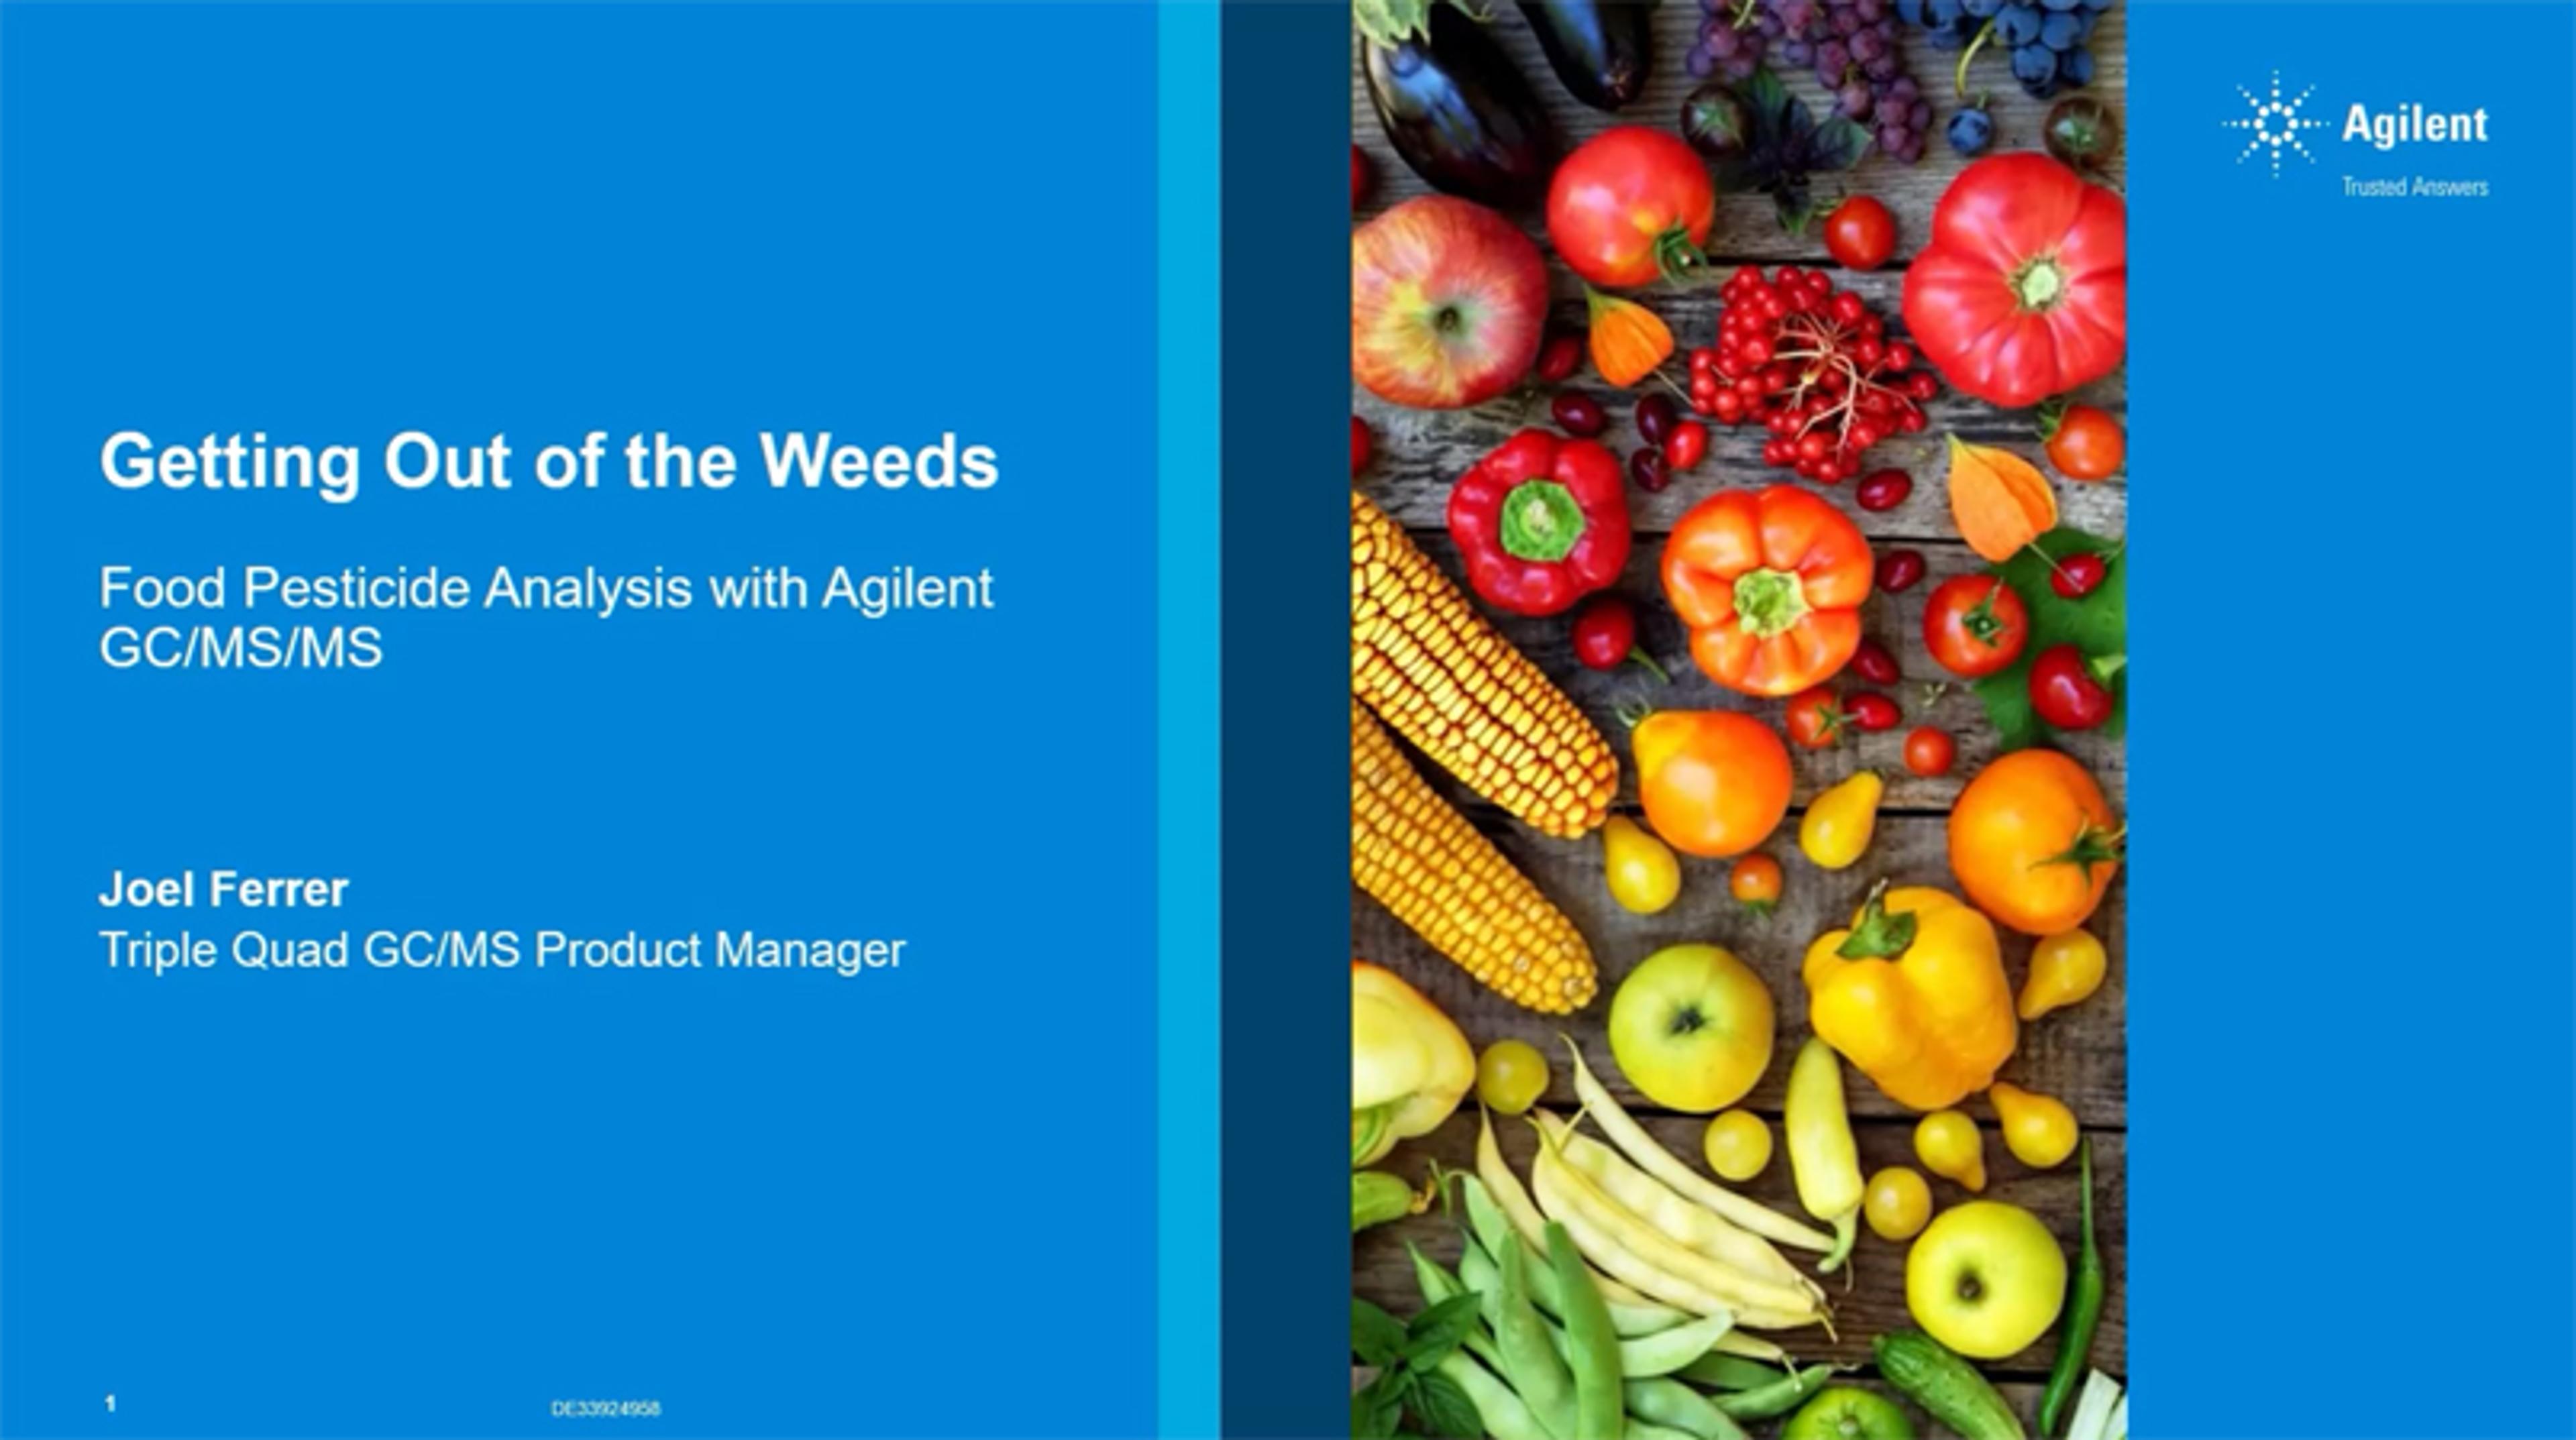 Getting out of the weeds: Food pesticide analysis with Agilent GC/MS/MS